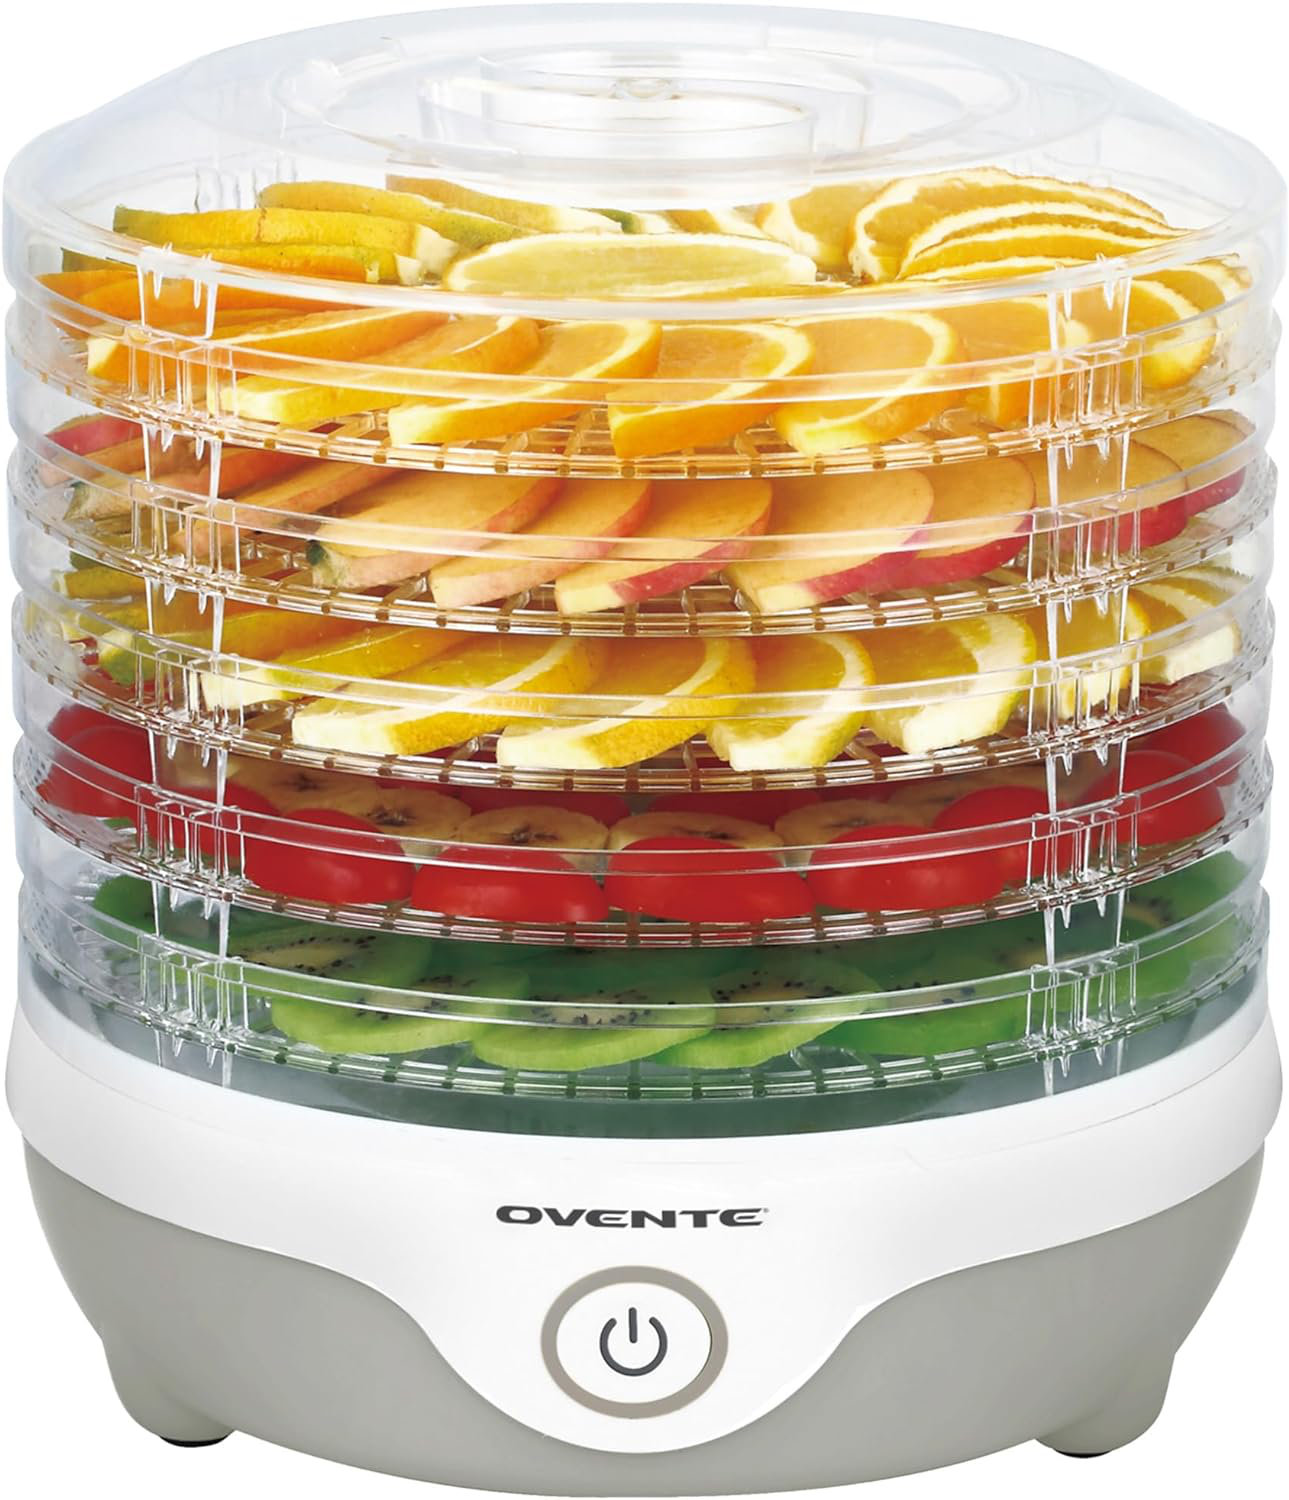 Ronco 5-Tray Electric Food Dehydrator - Product Tour 